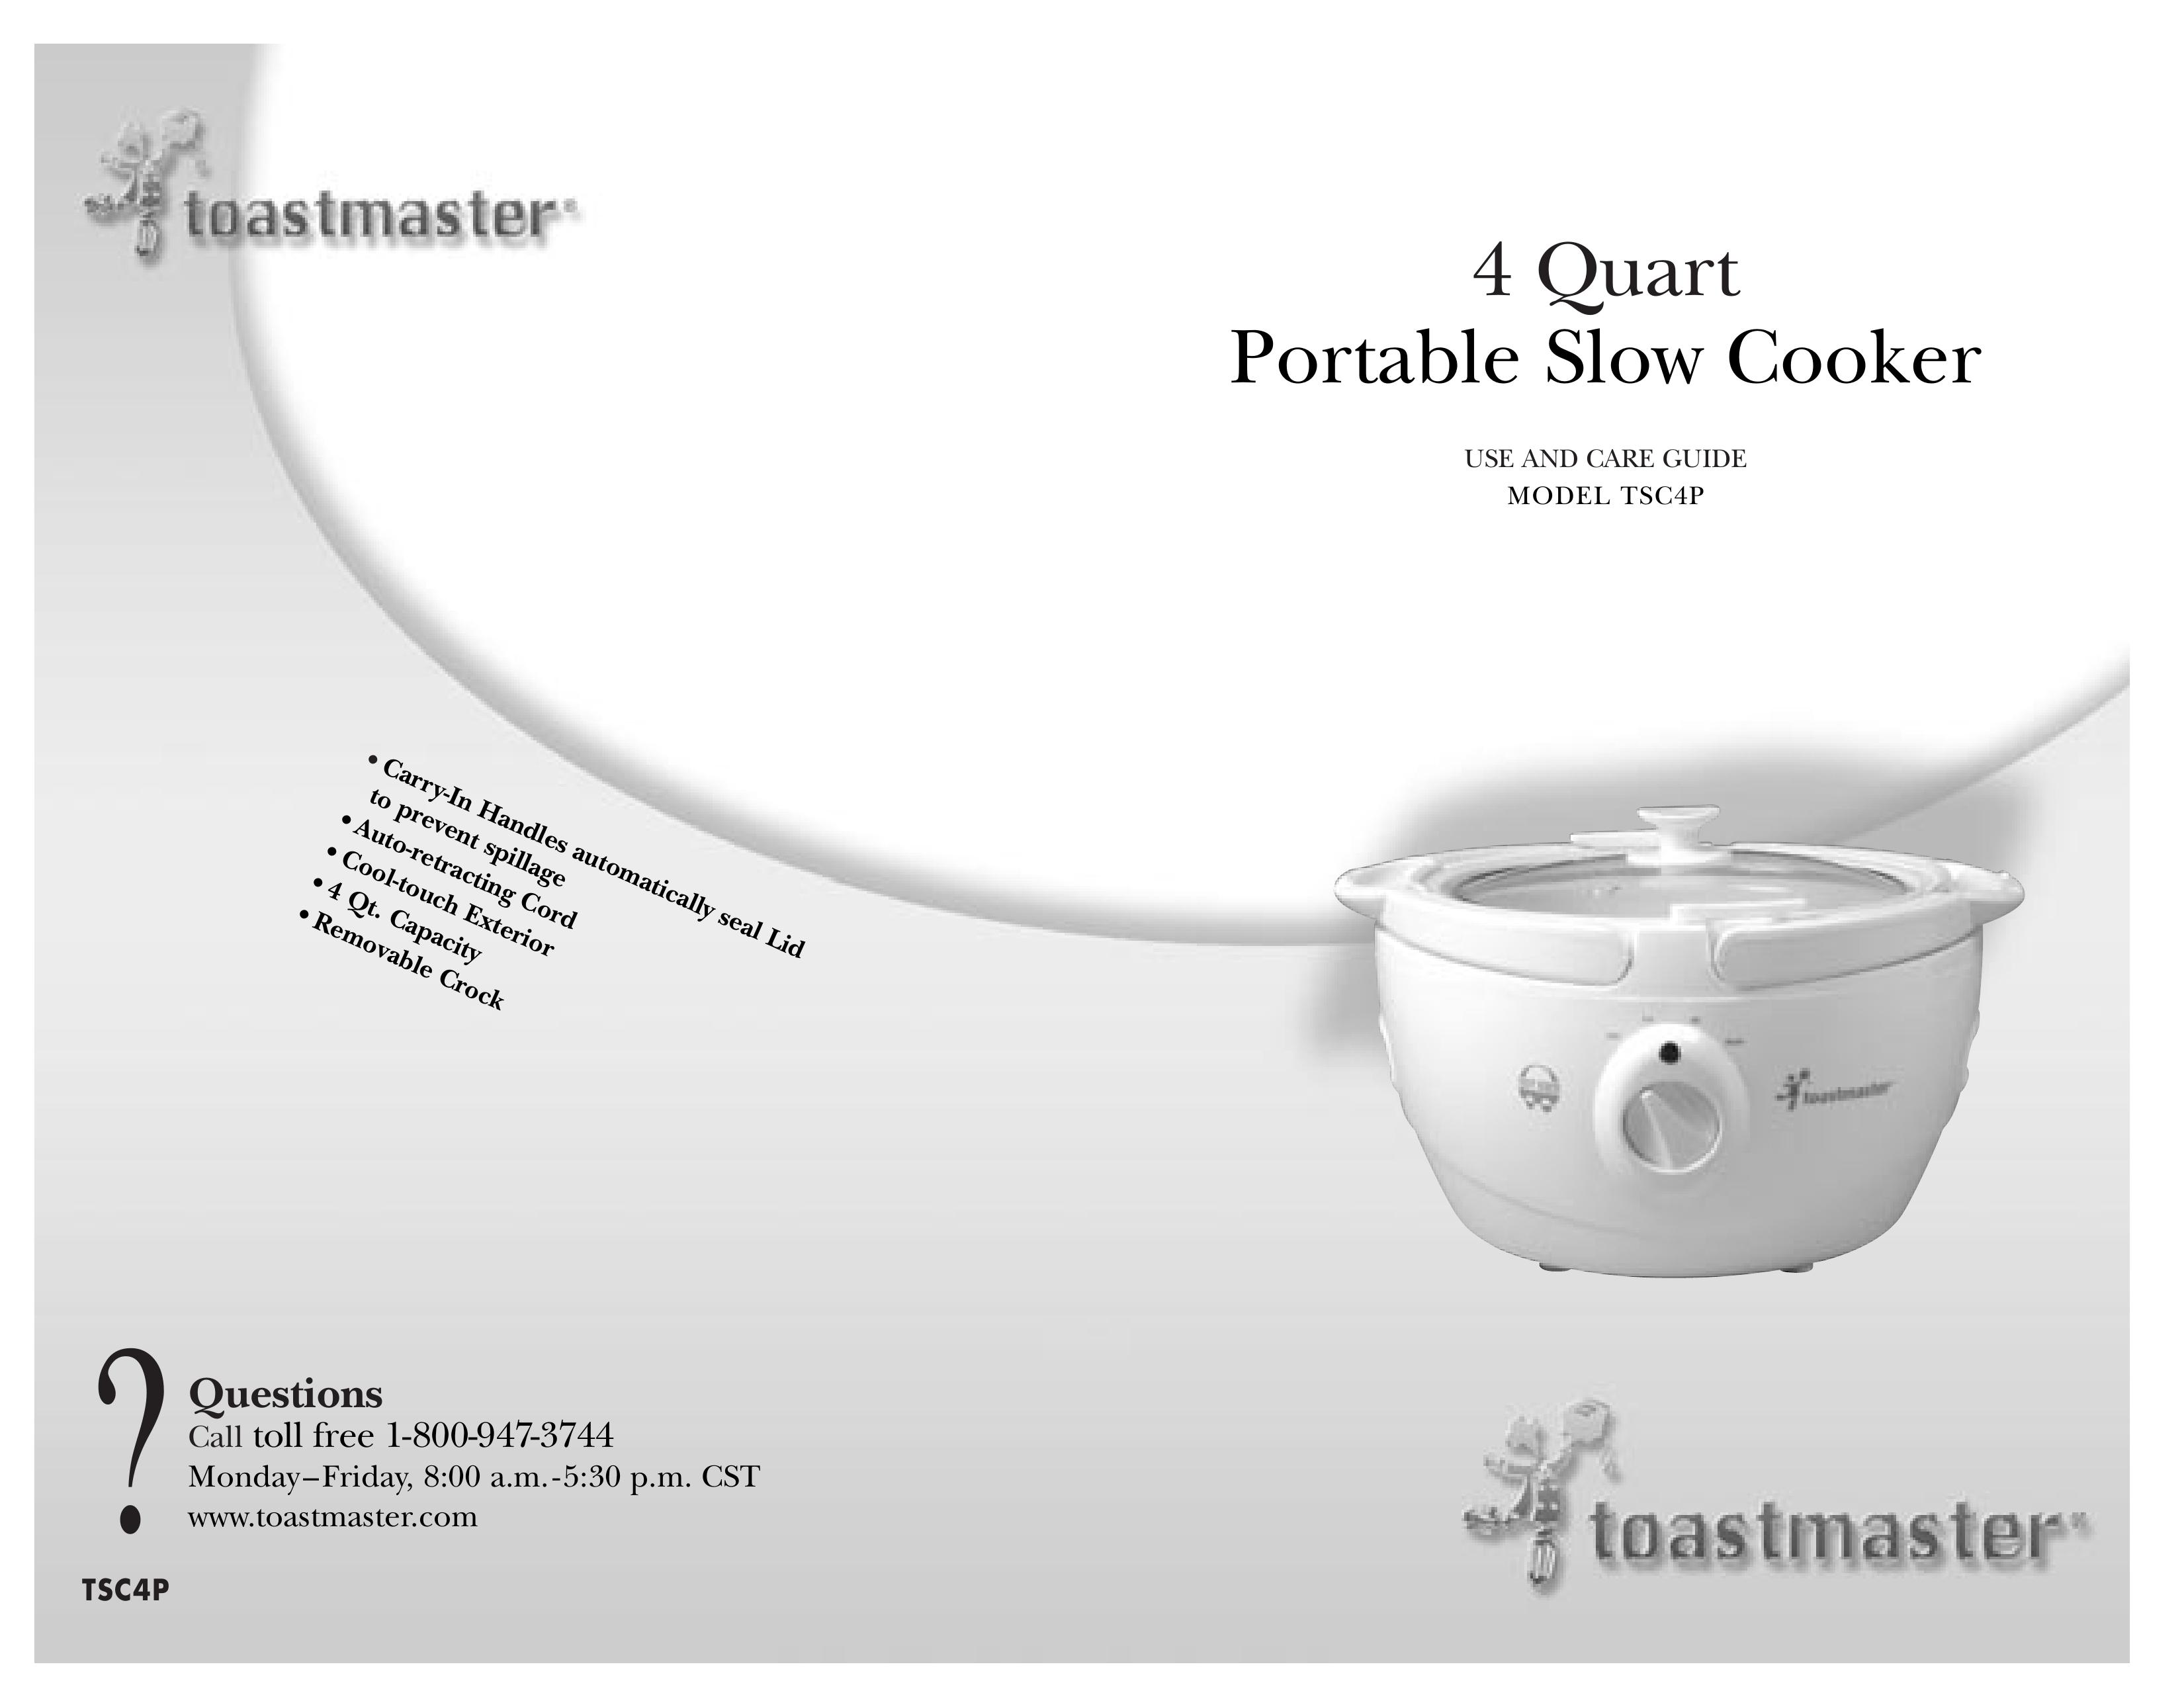 Toastmaster TSC4P Slow Cooker User Manual